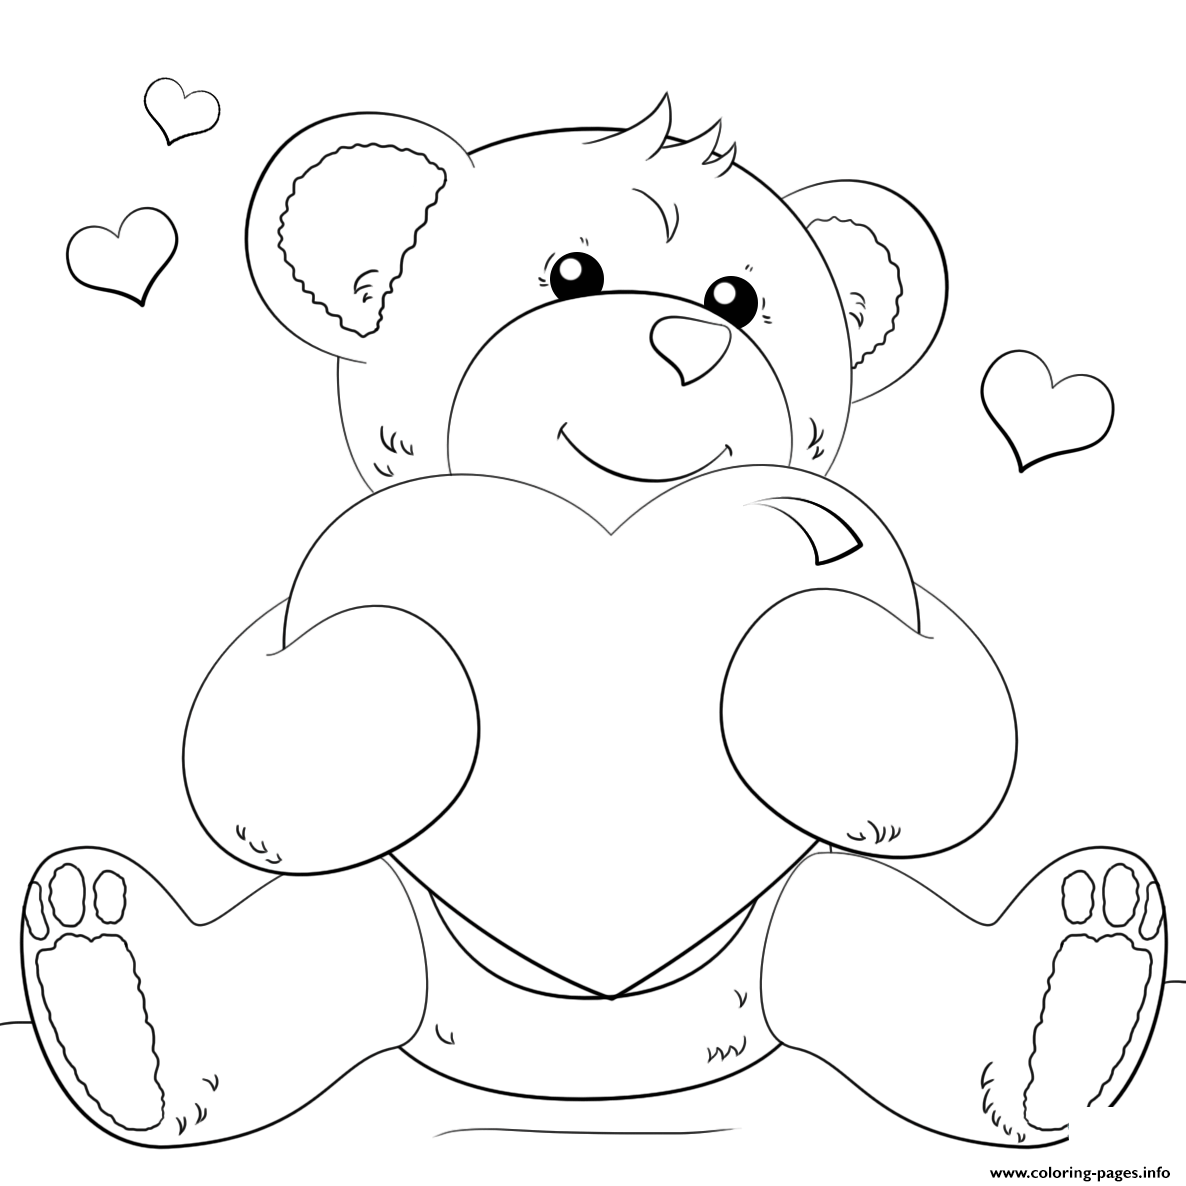 Bear And Heart coloring